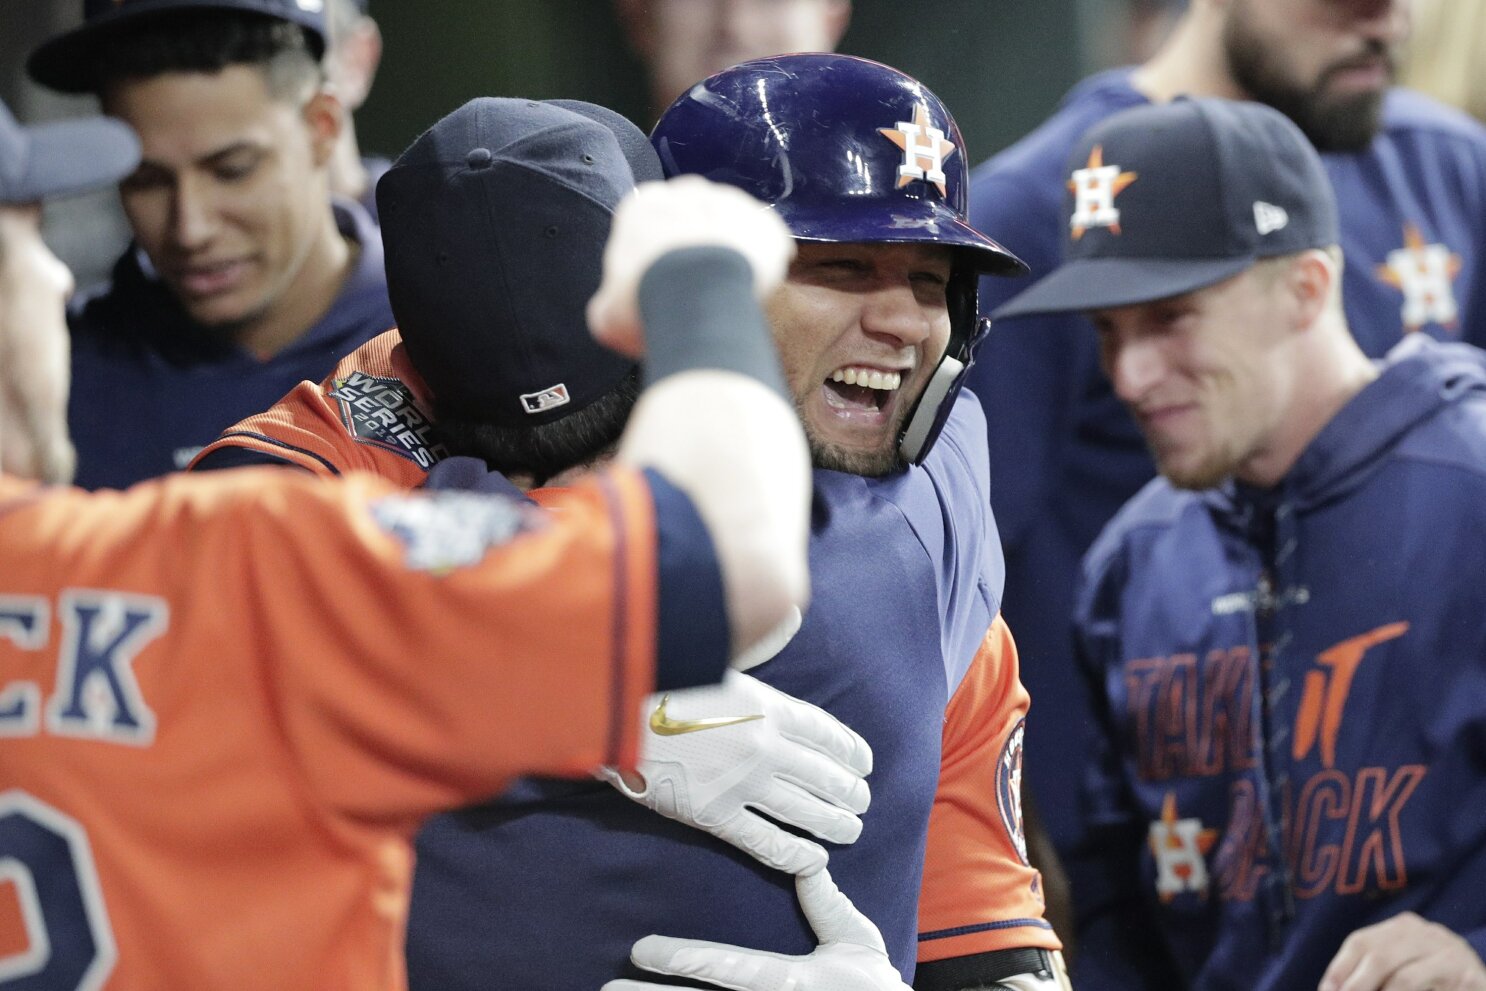 Astros' Alex Bregman stops to help stranded fan who happened to be sporting  his jersey